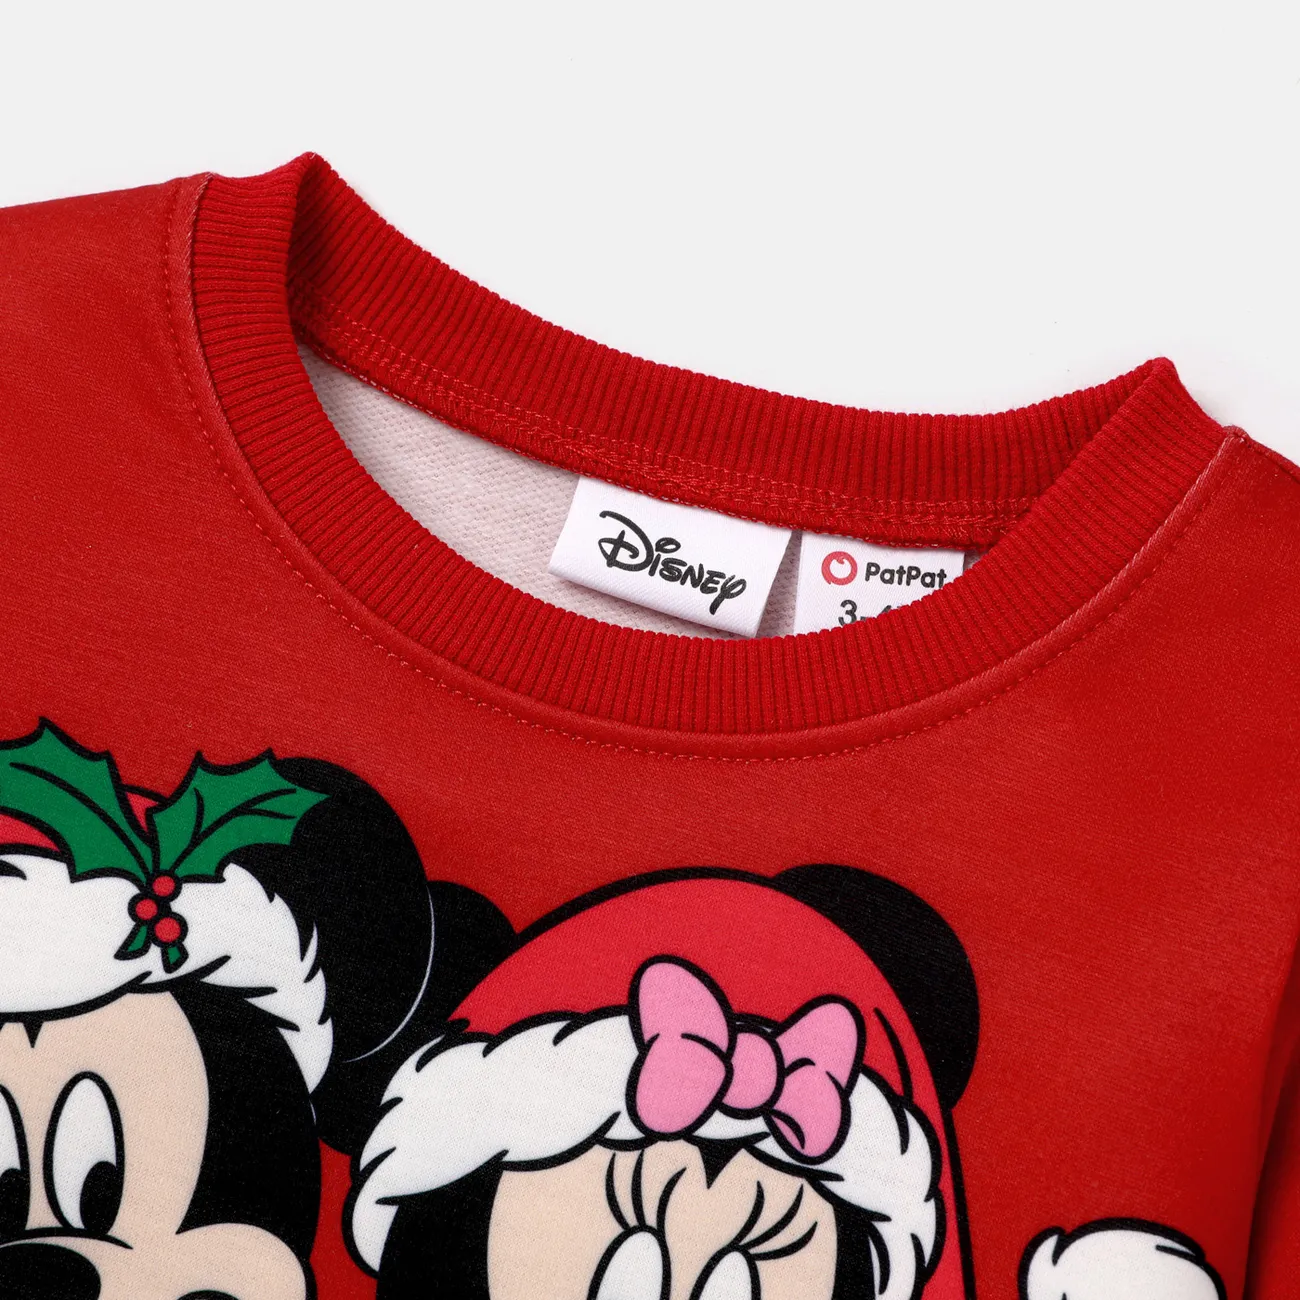 Disney Mickey and Friends Family Matching Christmas Character Print Sweatshirt Red big image 1